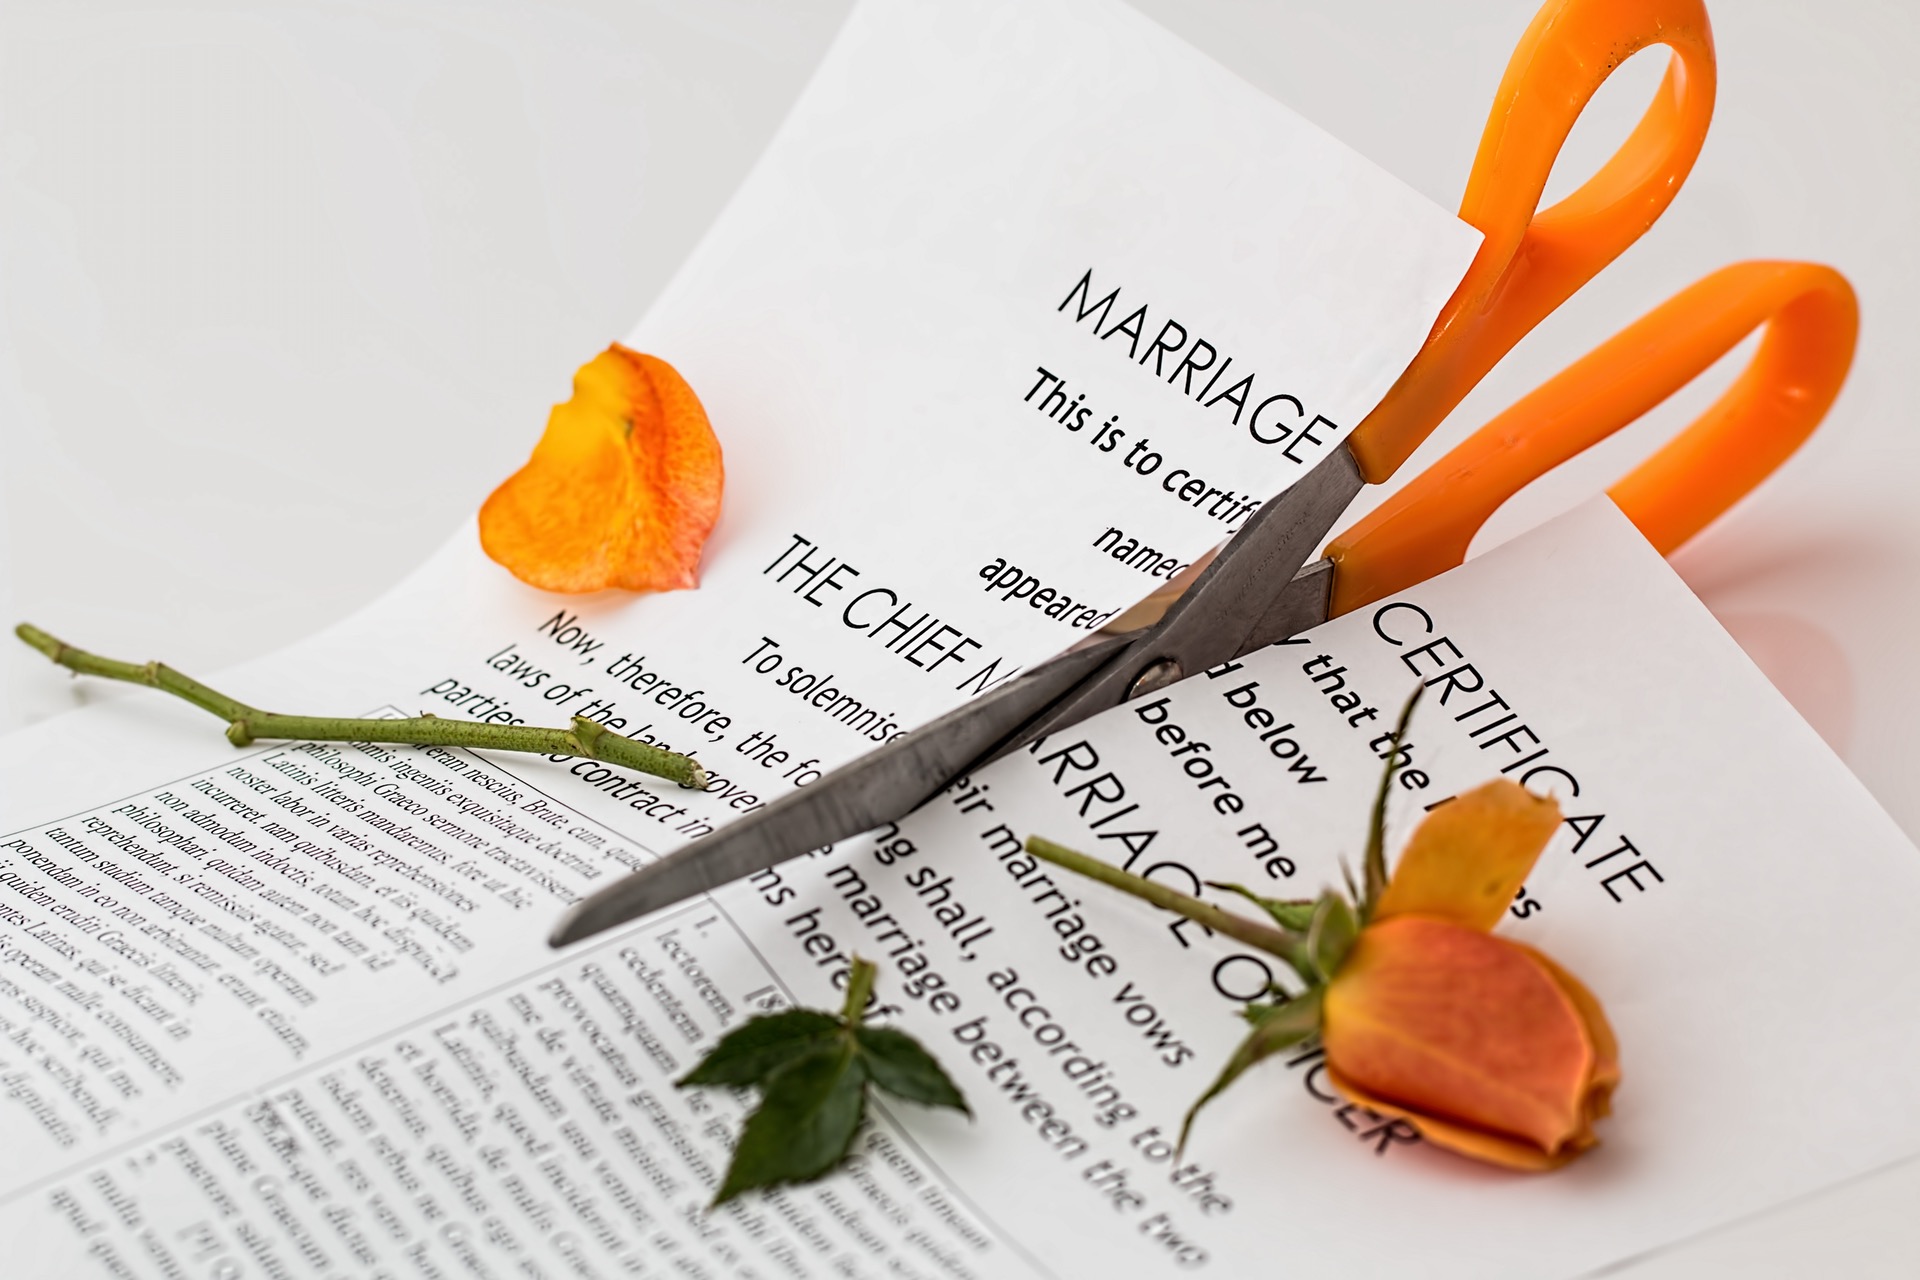 Gray Divorce - Estate Planning and Long-Term Care Planning